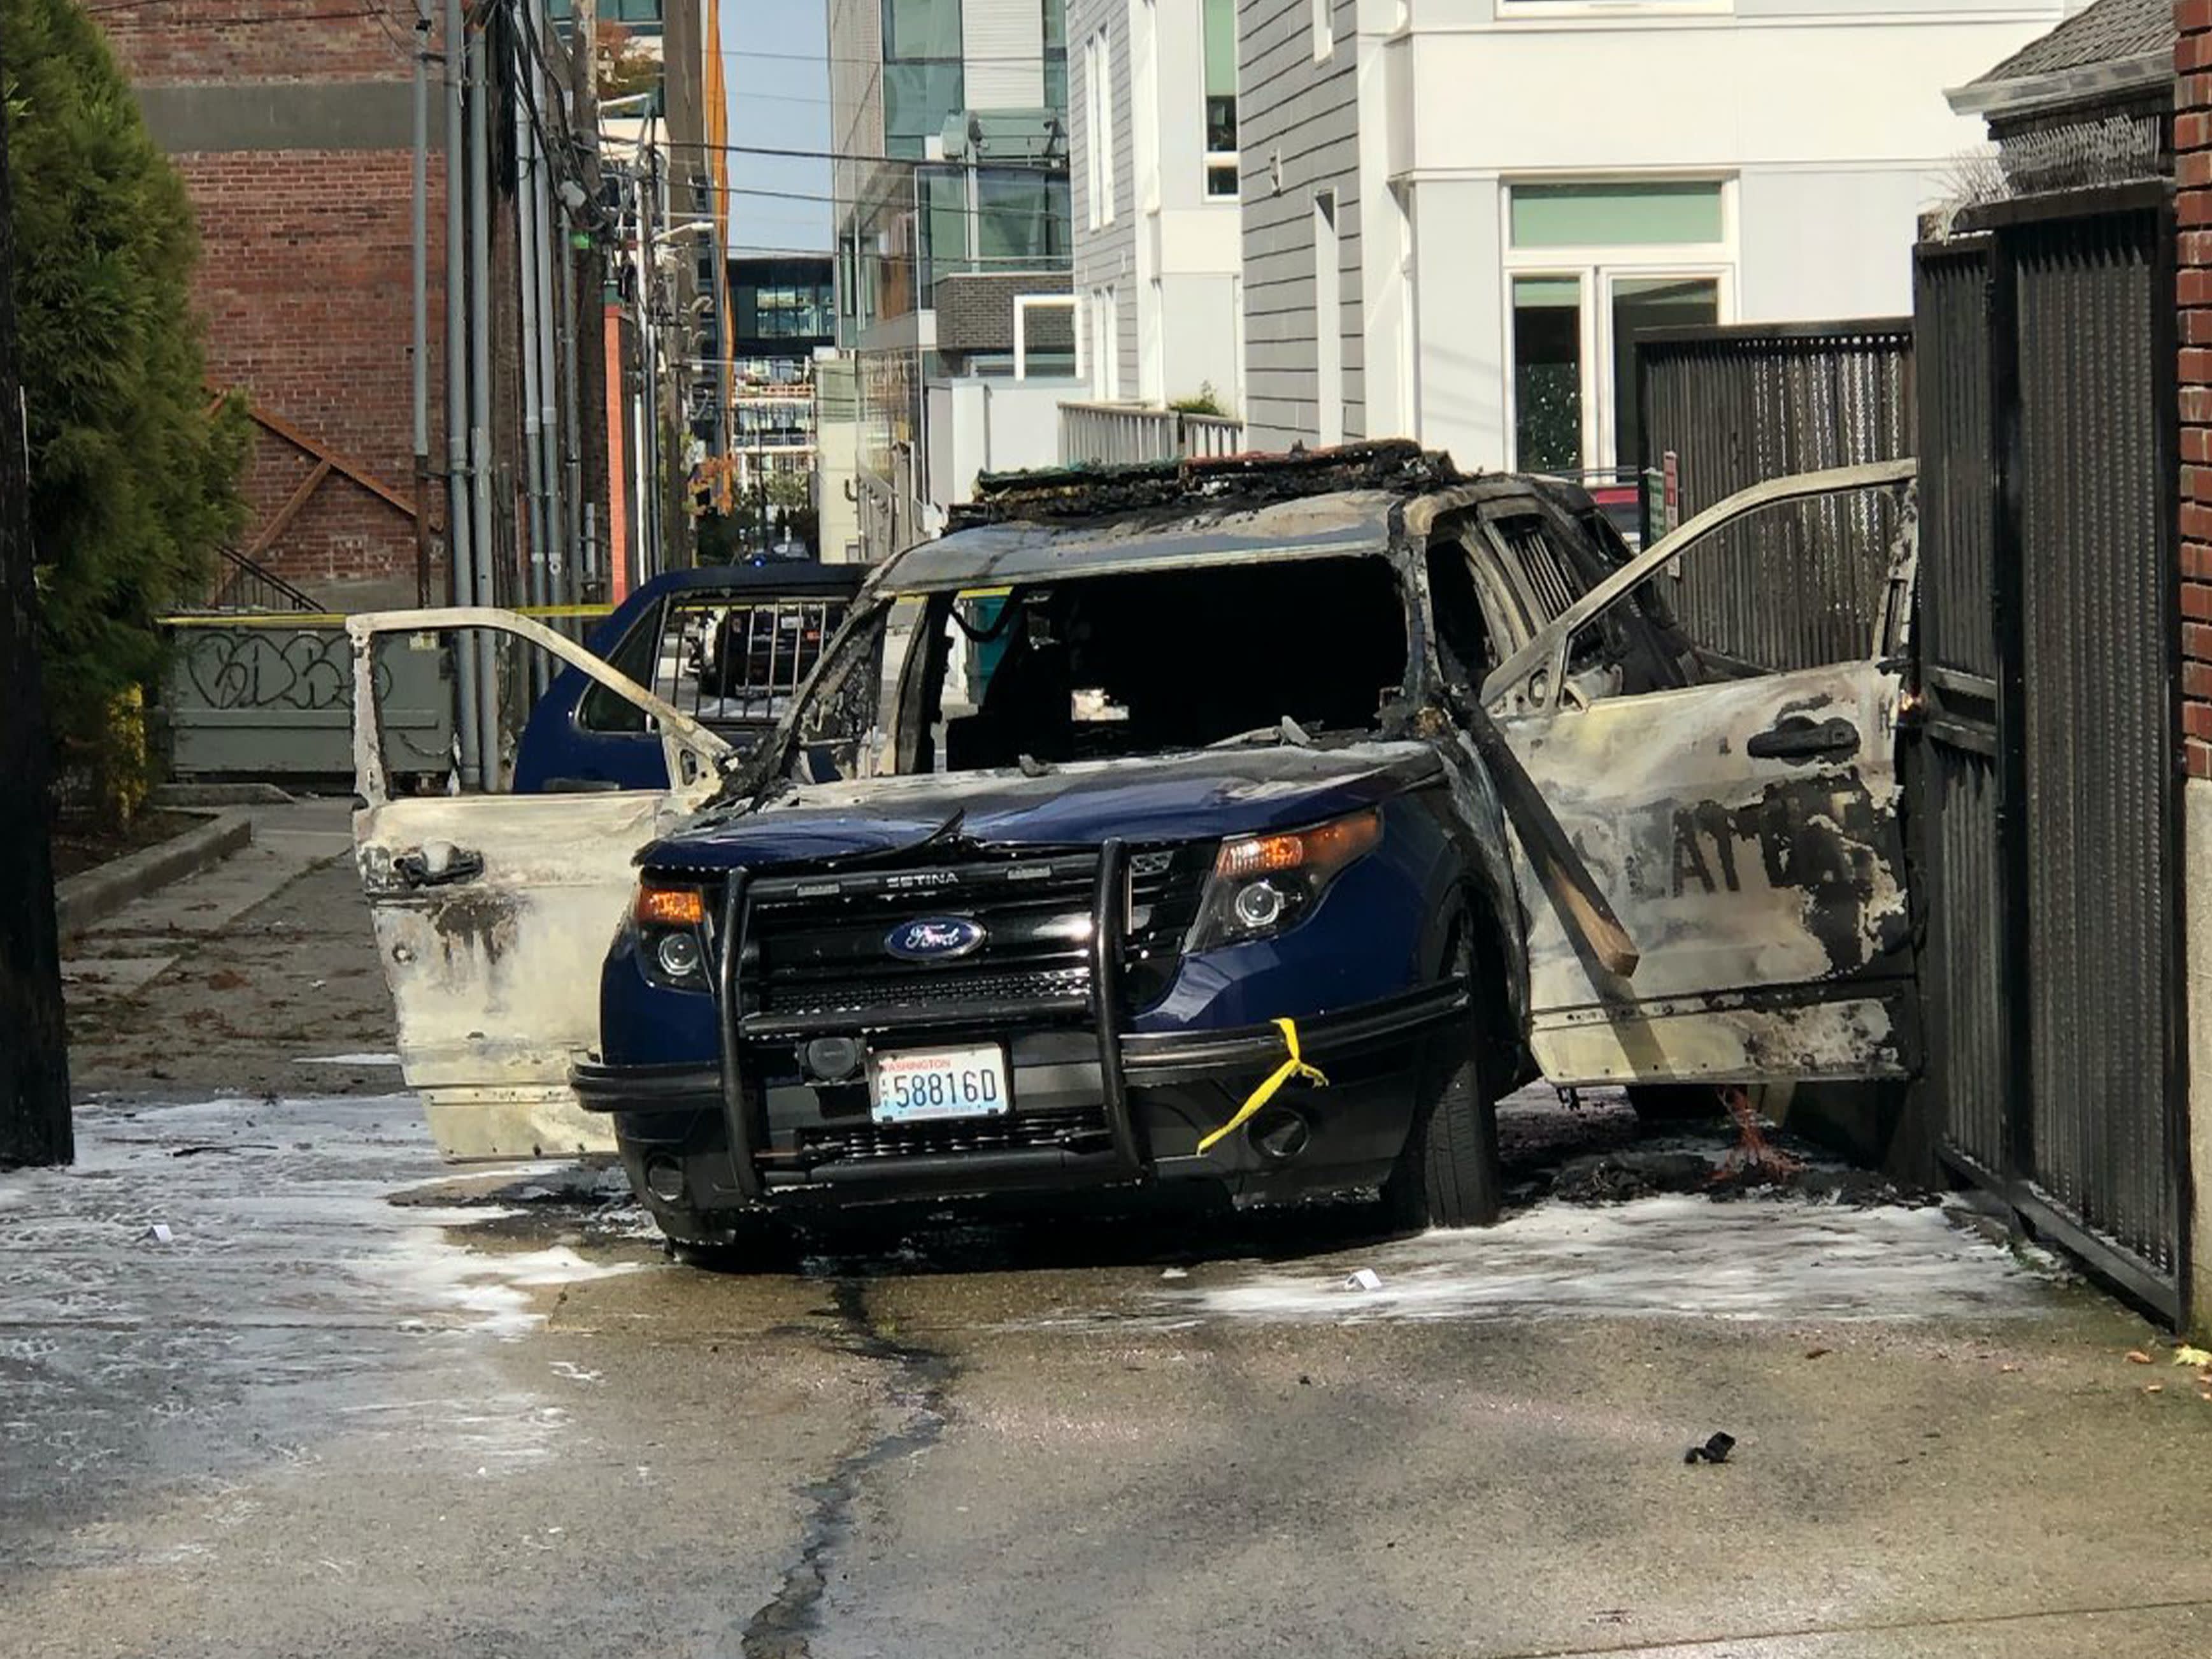 Man Sets Fire To Seattle Police Car With Officer Still Inside Authorities